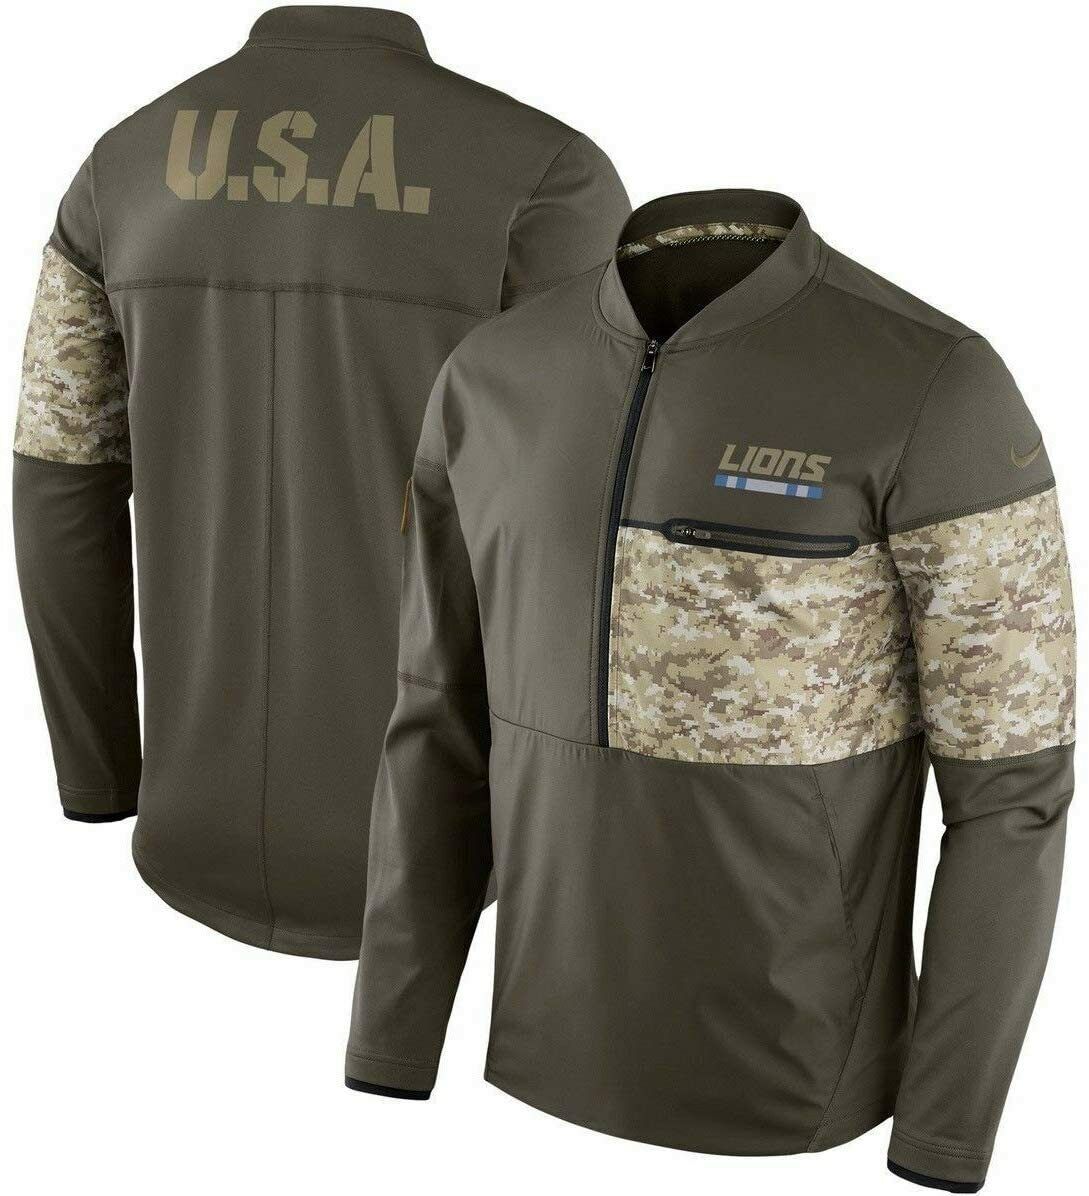 salute to service nfl jackets